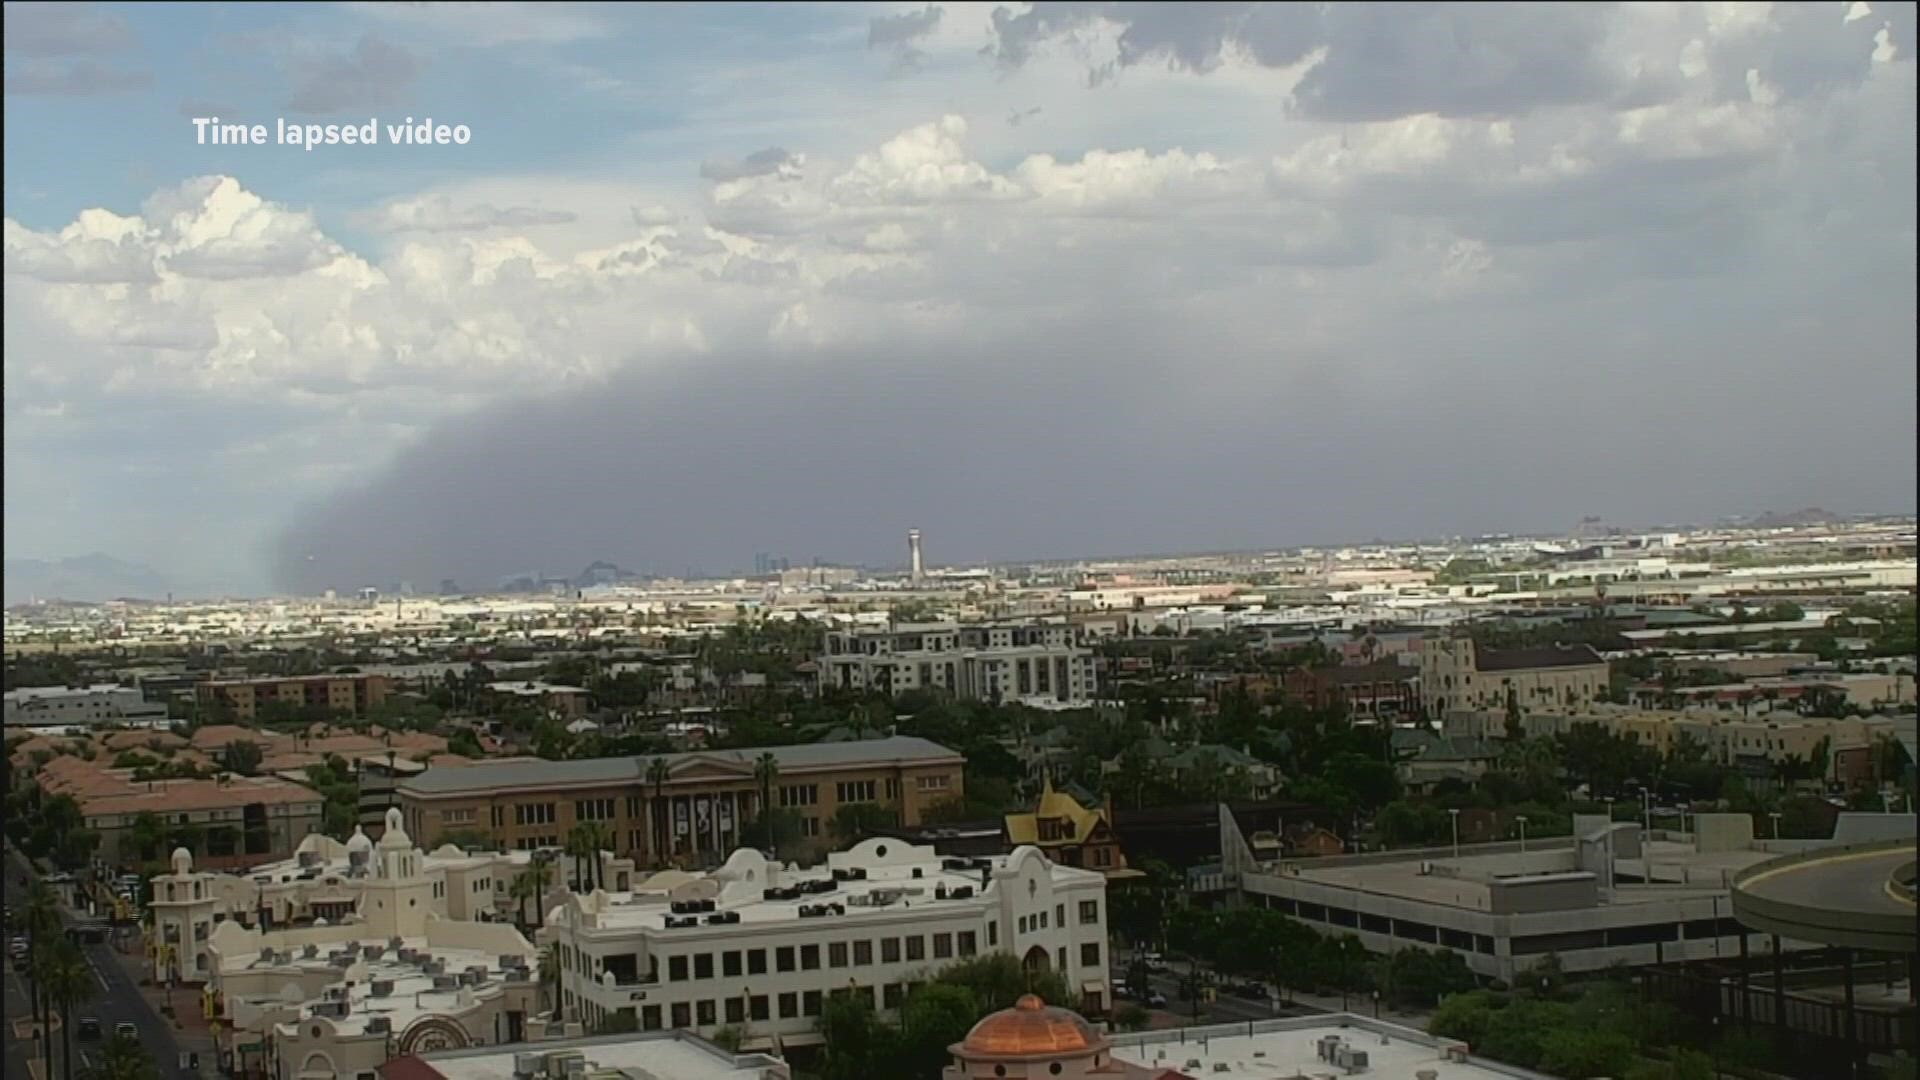 The roof cams at 12 News captured a wall of dust moving across the eat Valley. Check out the time-lapsed video!